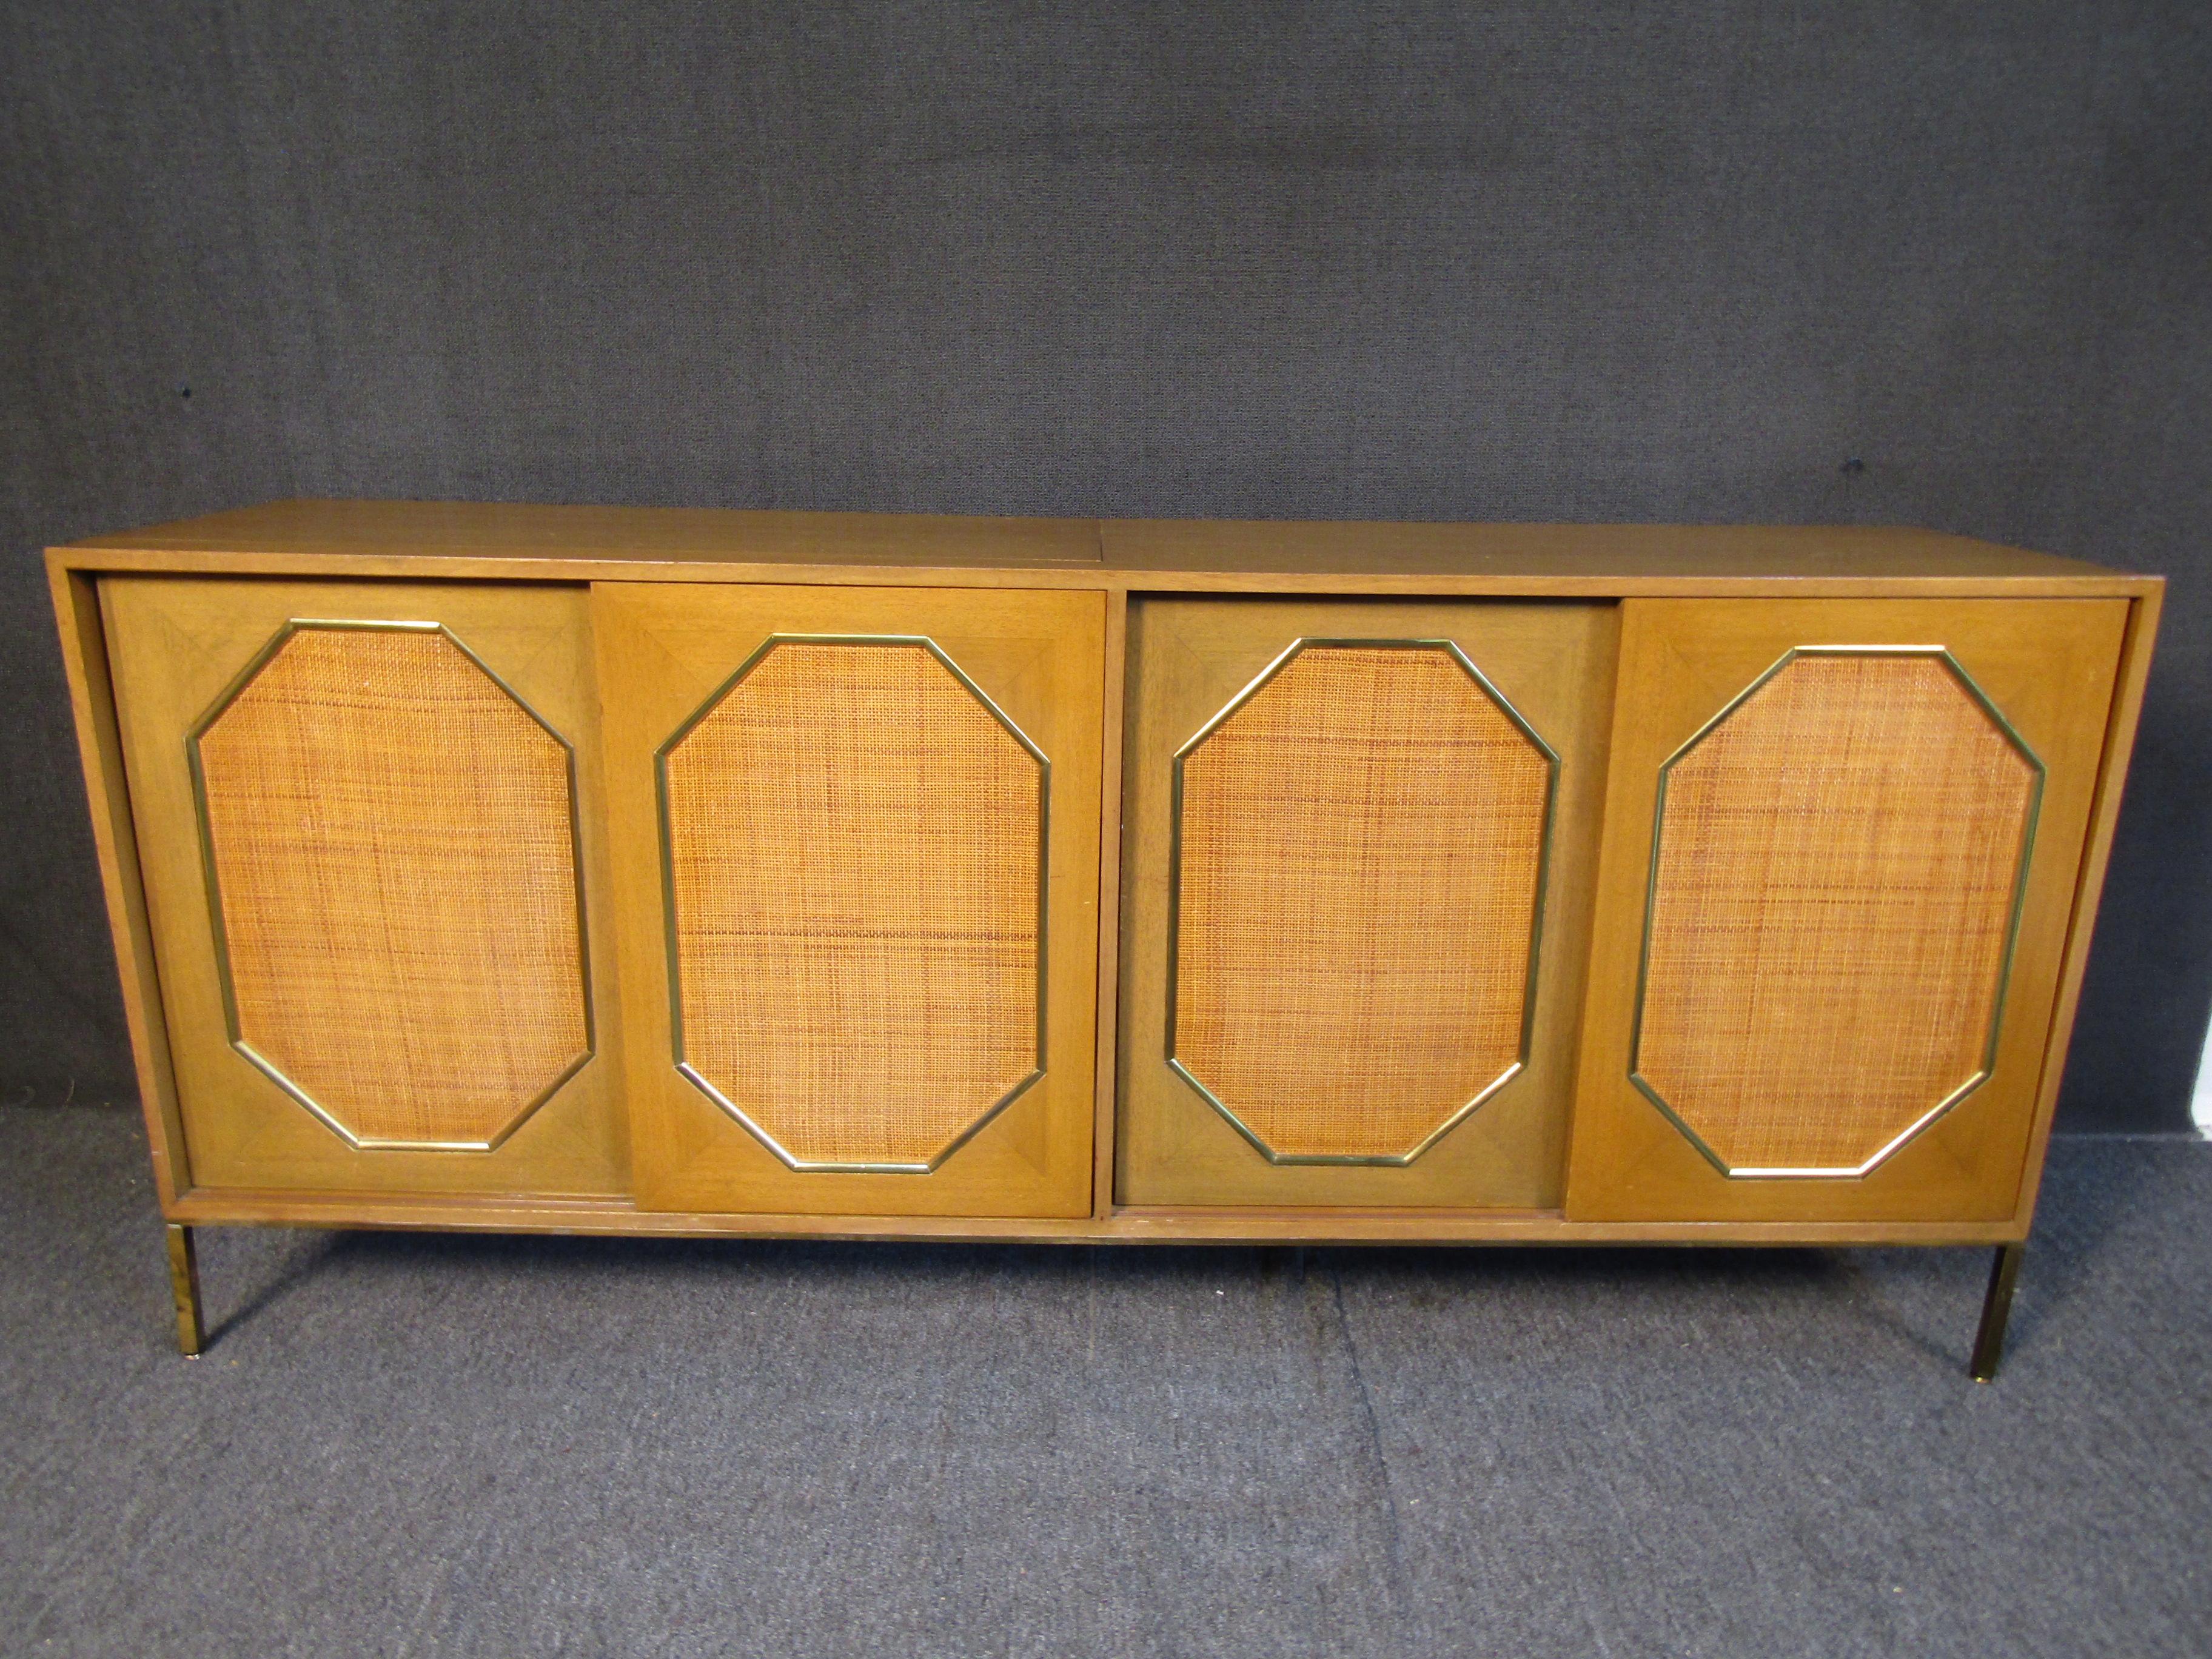 For use as a cabinet or dry bar, this vintage piece by Harvey Probber features a unique design with sliding front doors and an opening top surface. Woven panels on the sliding doors and brass trim make this piece an eye-catching addition to any